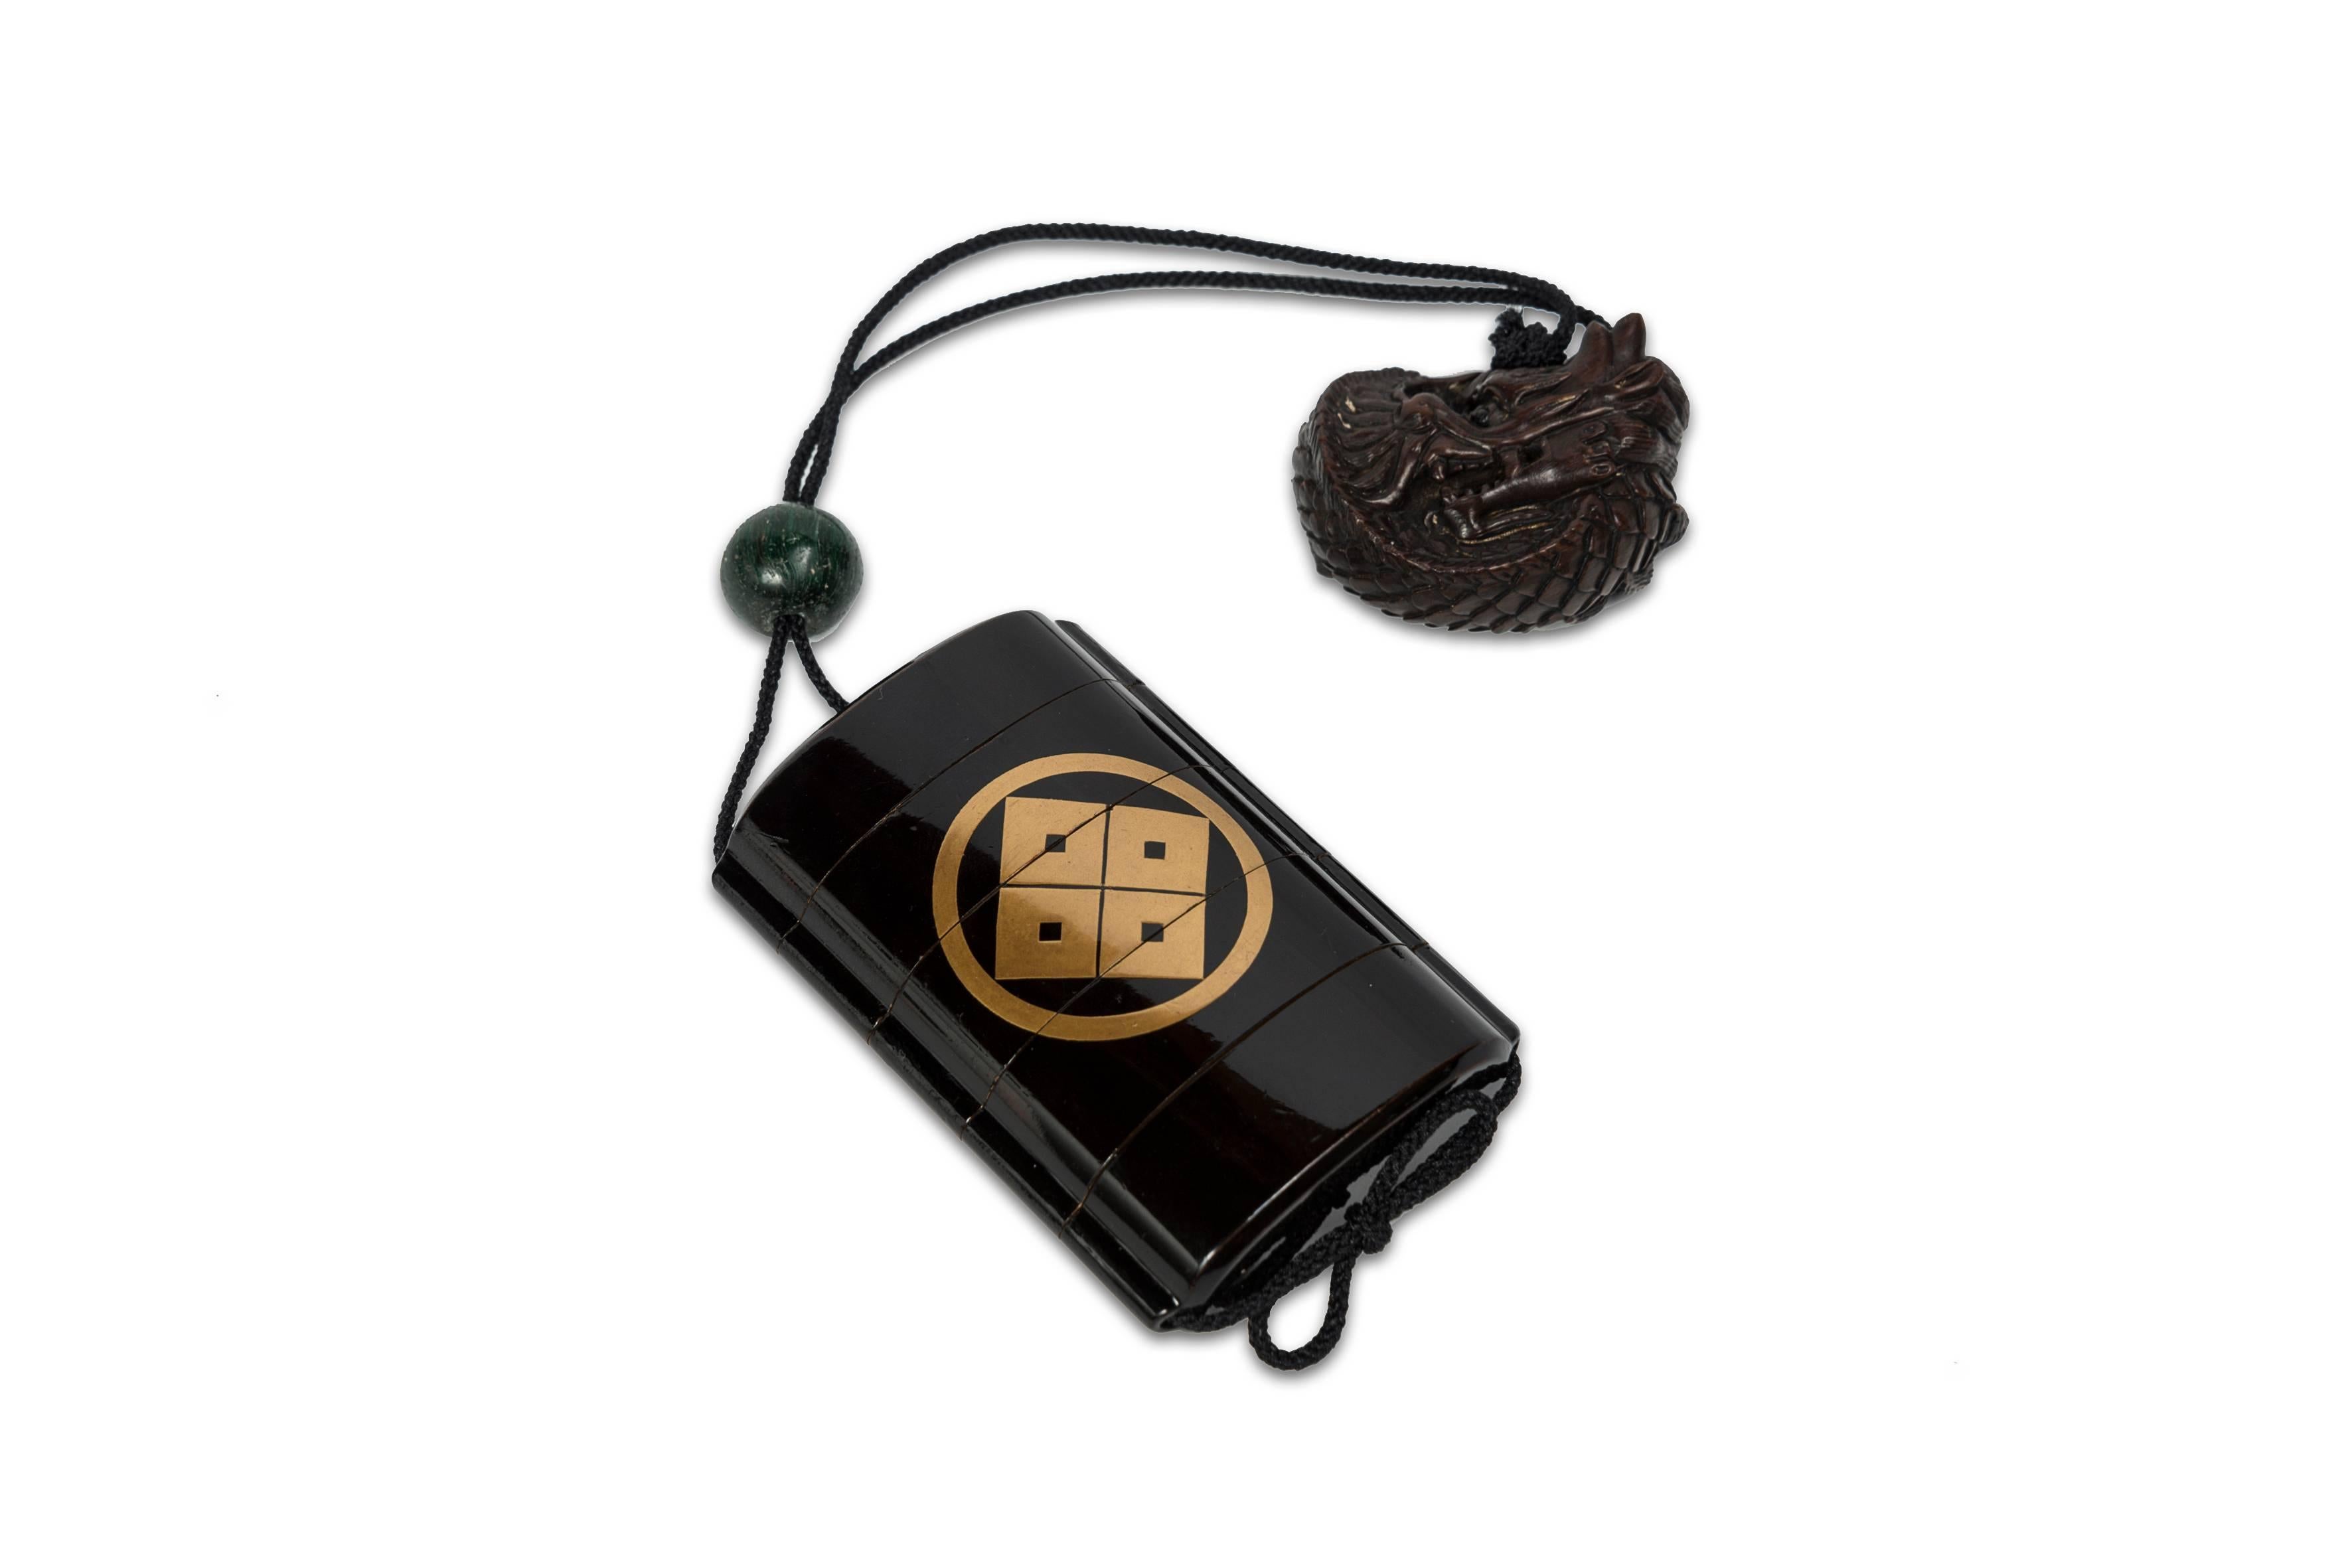 Inro are small divided boxes suspended from the belt which are a part of sagemono (suspended objects). Indeed, their use was developed to solve the lack of pocket in kimonos.
This one is in black lacquer decorated with the môn of the so family in